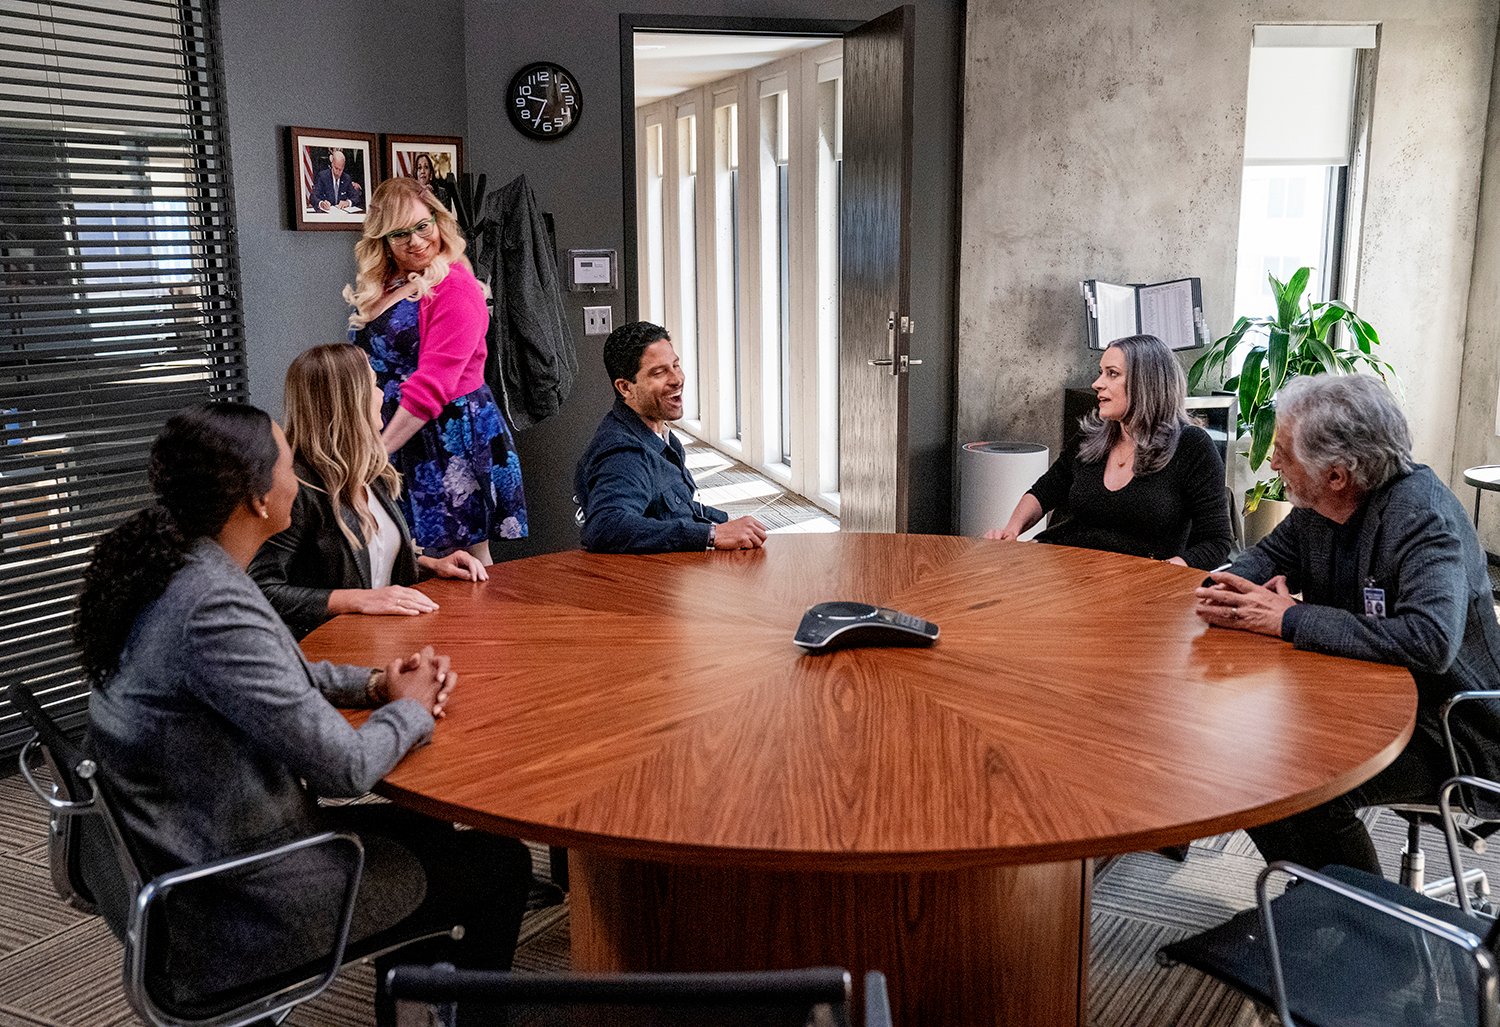 Criminal Minds: Evolution cast and characters: Aisha Tyler as Dr. Tara Lewis, A.J. Cook as Jennifer Jareau, Kirsten Vangsness as Penelope Garcia, Adam Rodriguez as Luke Alvez, Paget Brewster as Emily Prentiss and Joe Mantegna as David Rossi sitting around a table in the BAU office.